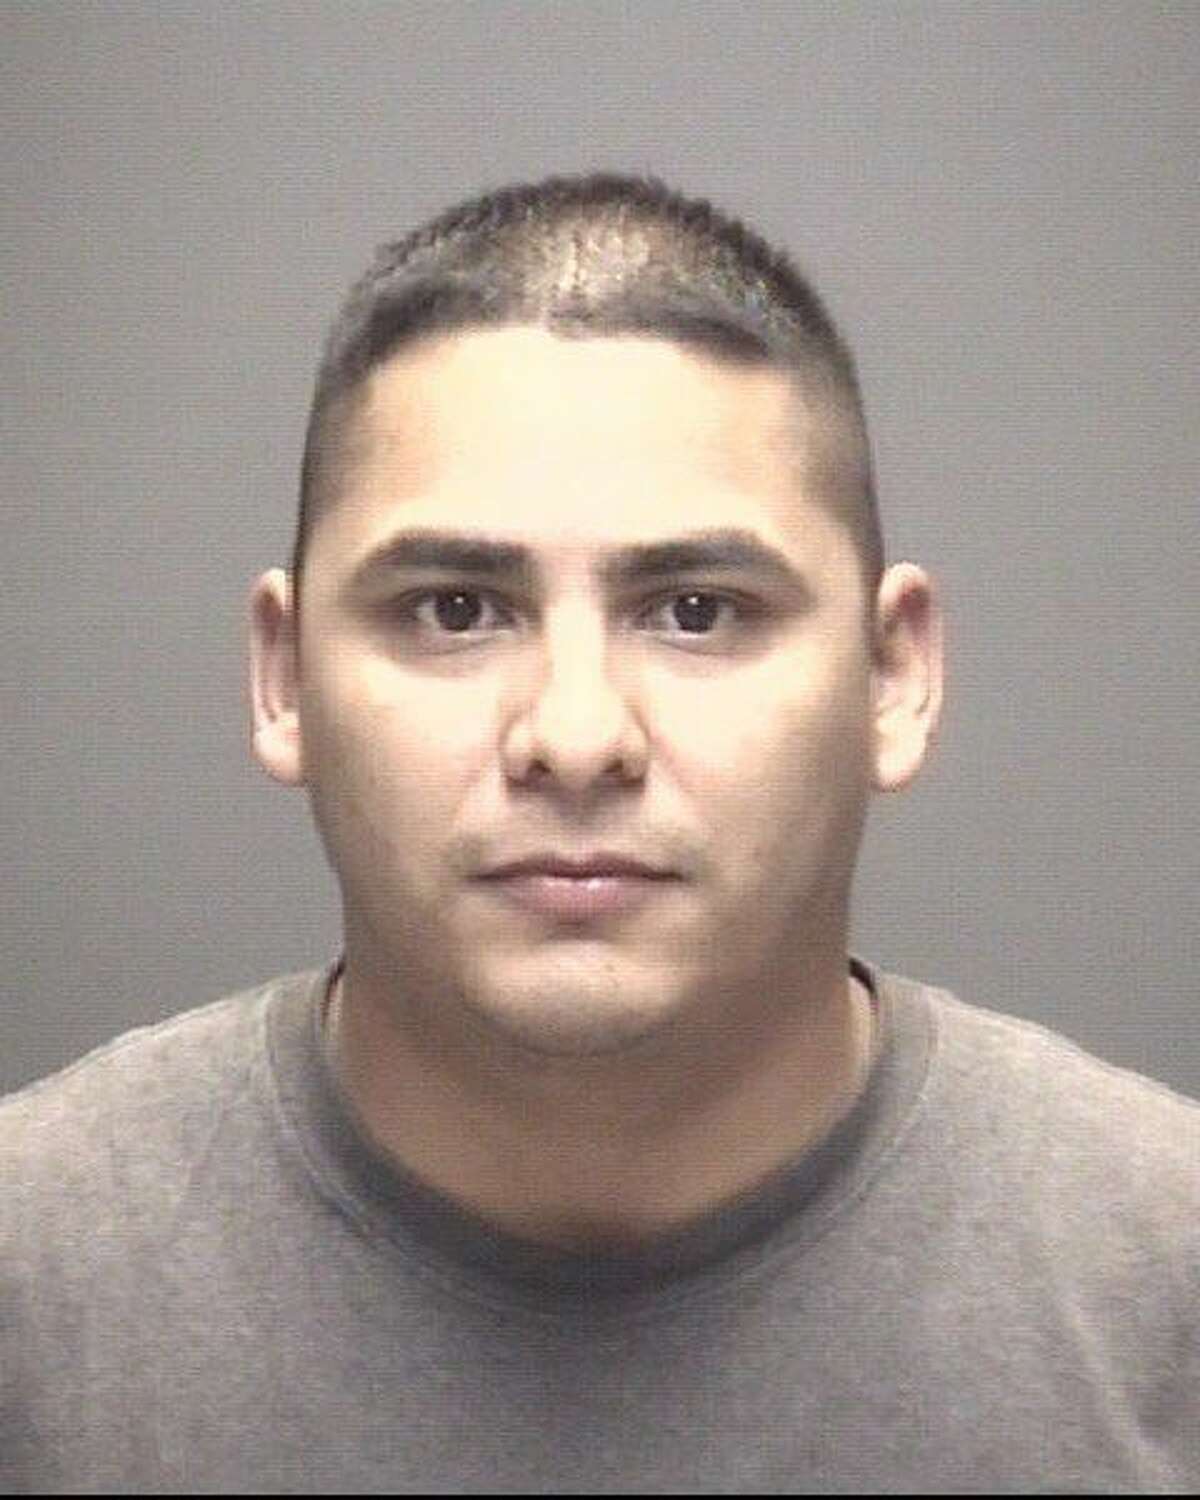 FILE - An undated booking photograph of Ruben Noel Ornelas. A judge sentenced Ornelas, a former Galveston County Sheriff's deputy, to 20 years in prison following his conviction on charges of indecency with a child and online solicitation of a minor.